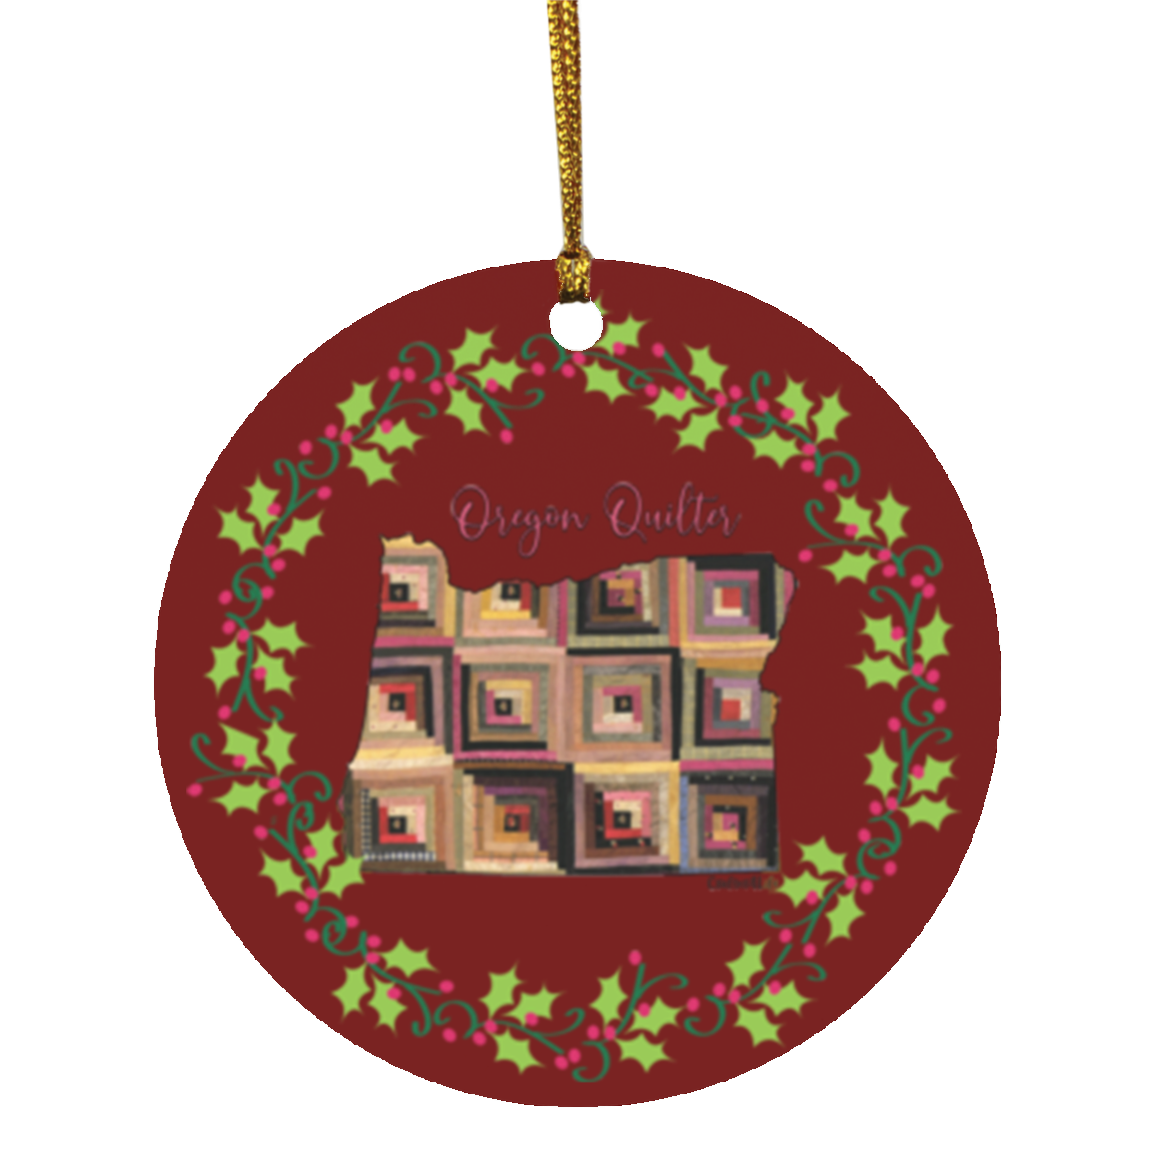 Oregon Quilter Christmas Circle Ornament